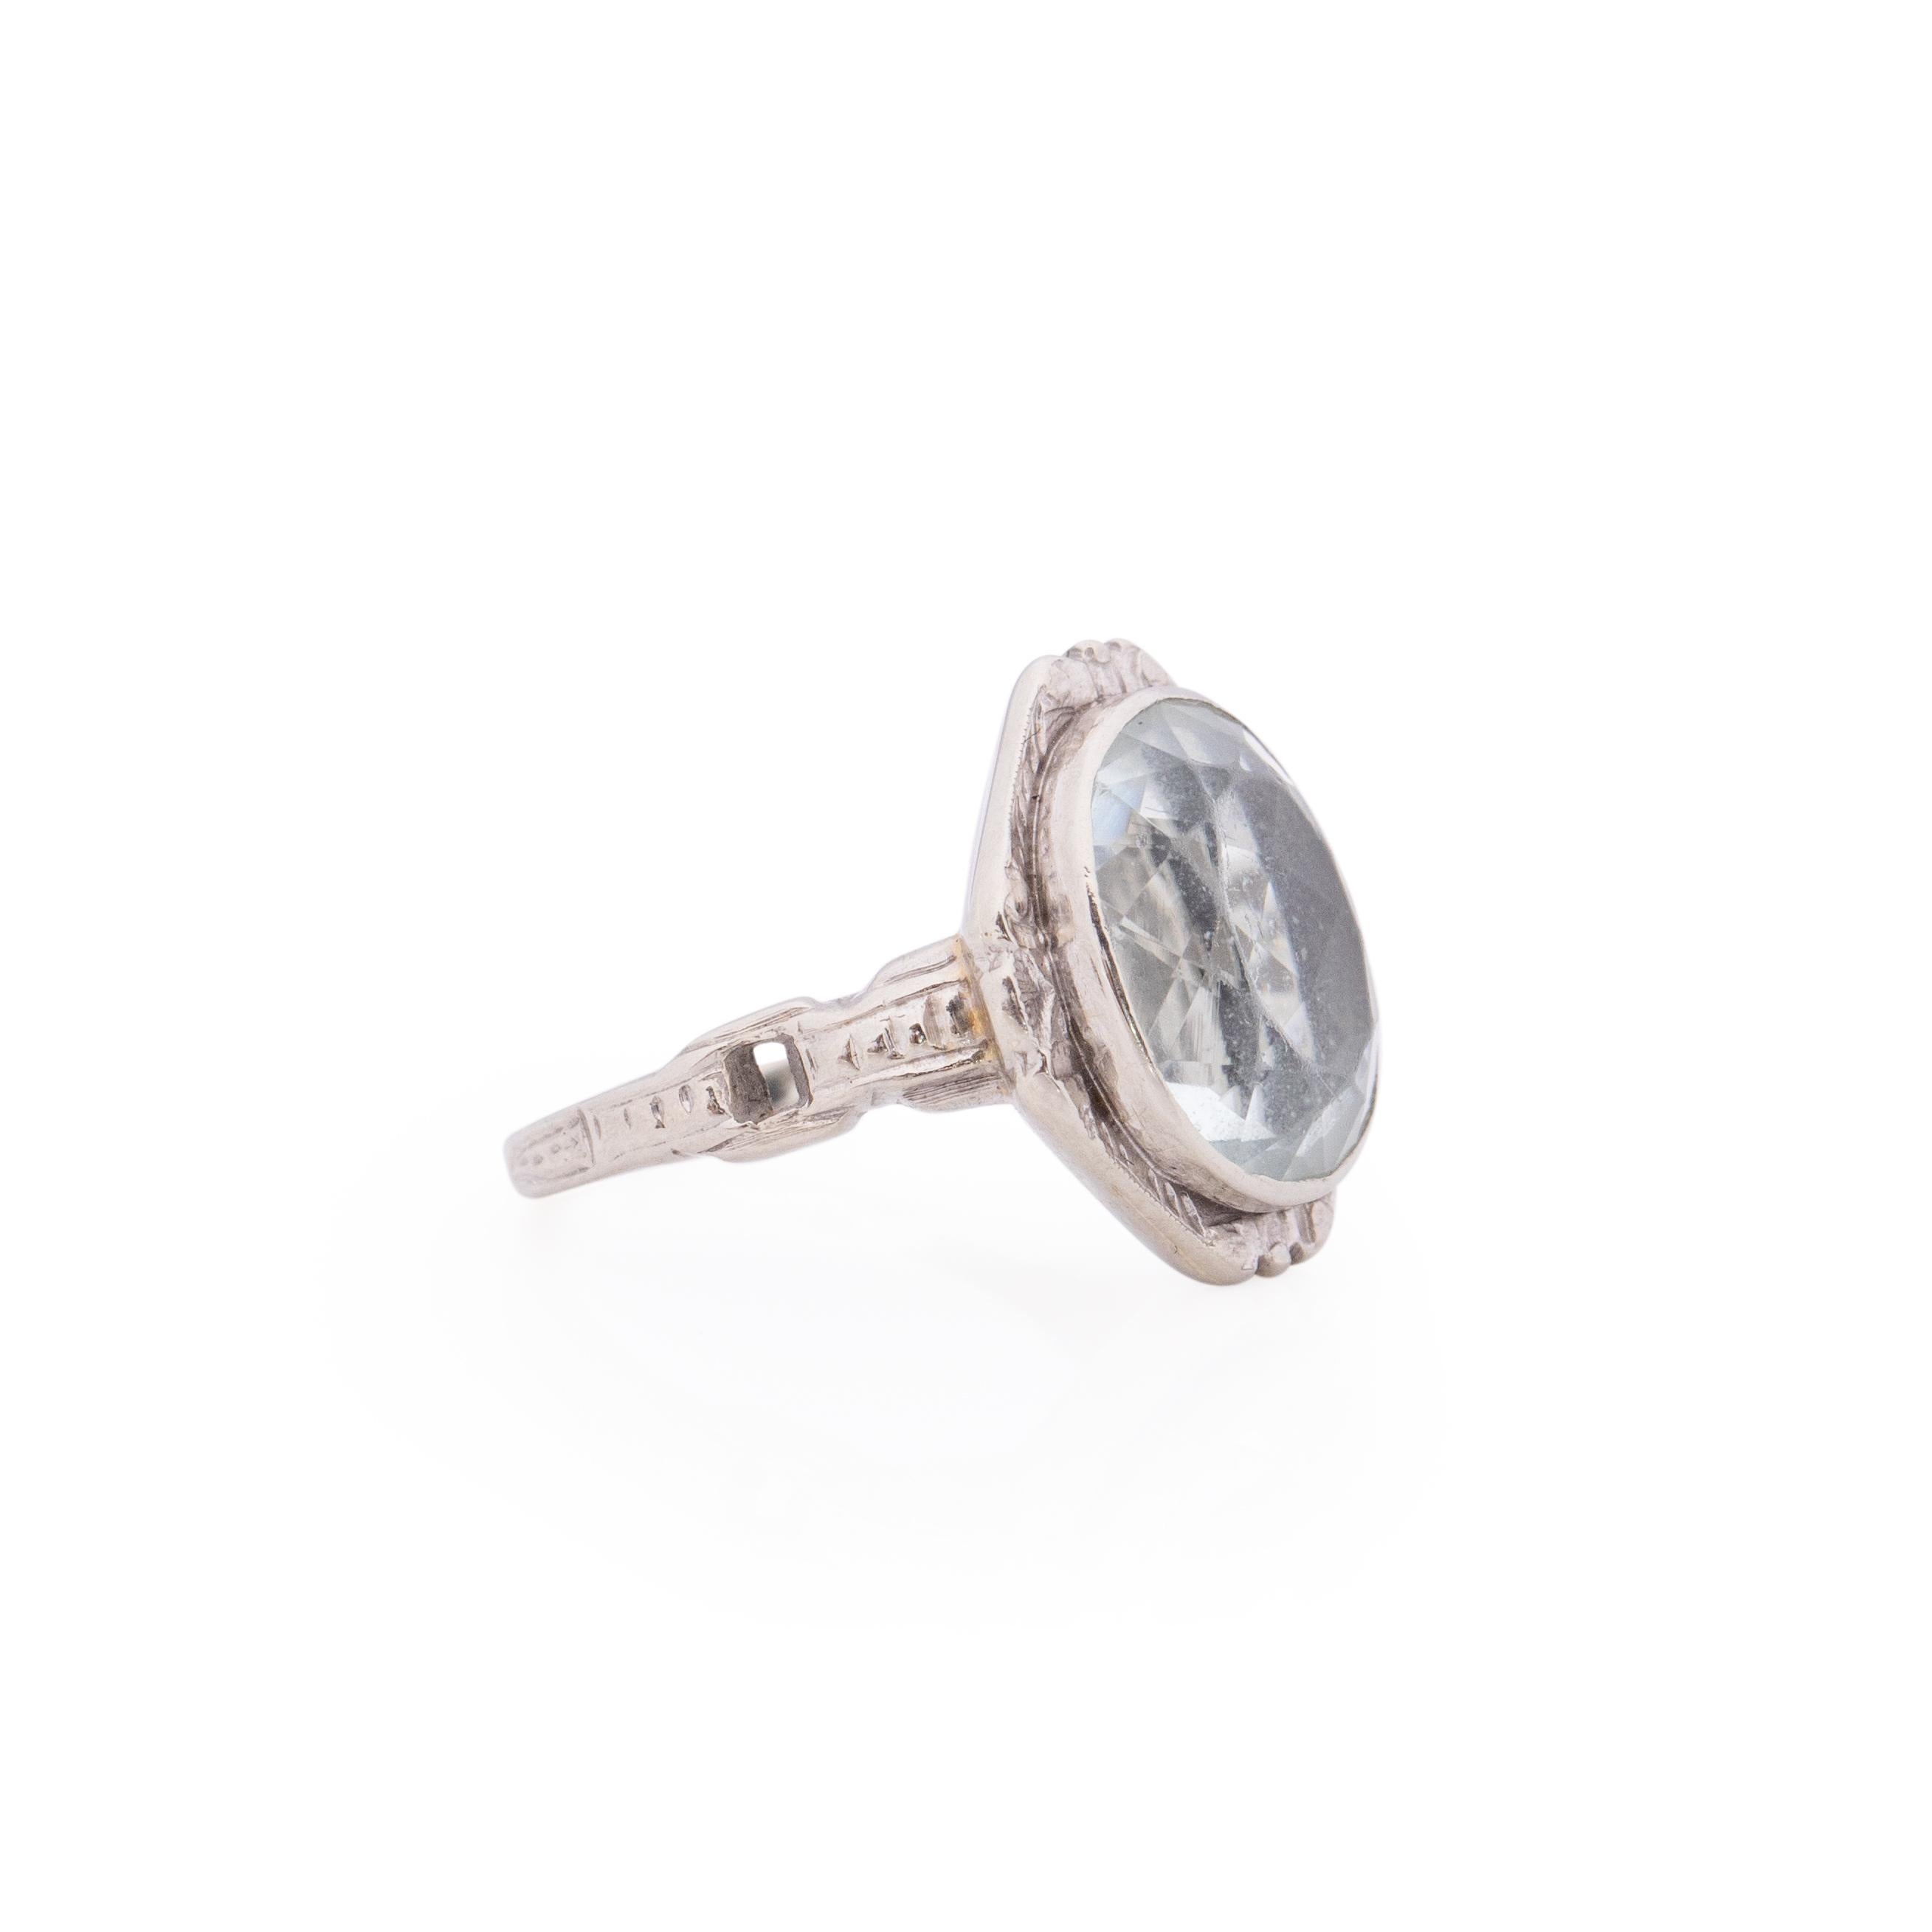 Here we have a breath taking pale blue antique oval aquamarine fashion ring. This gem is being held in by a 14K white gold bezel that has a simple carved halo, adding to the classic art deco look. Down the shank is a elegant buckle design,